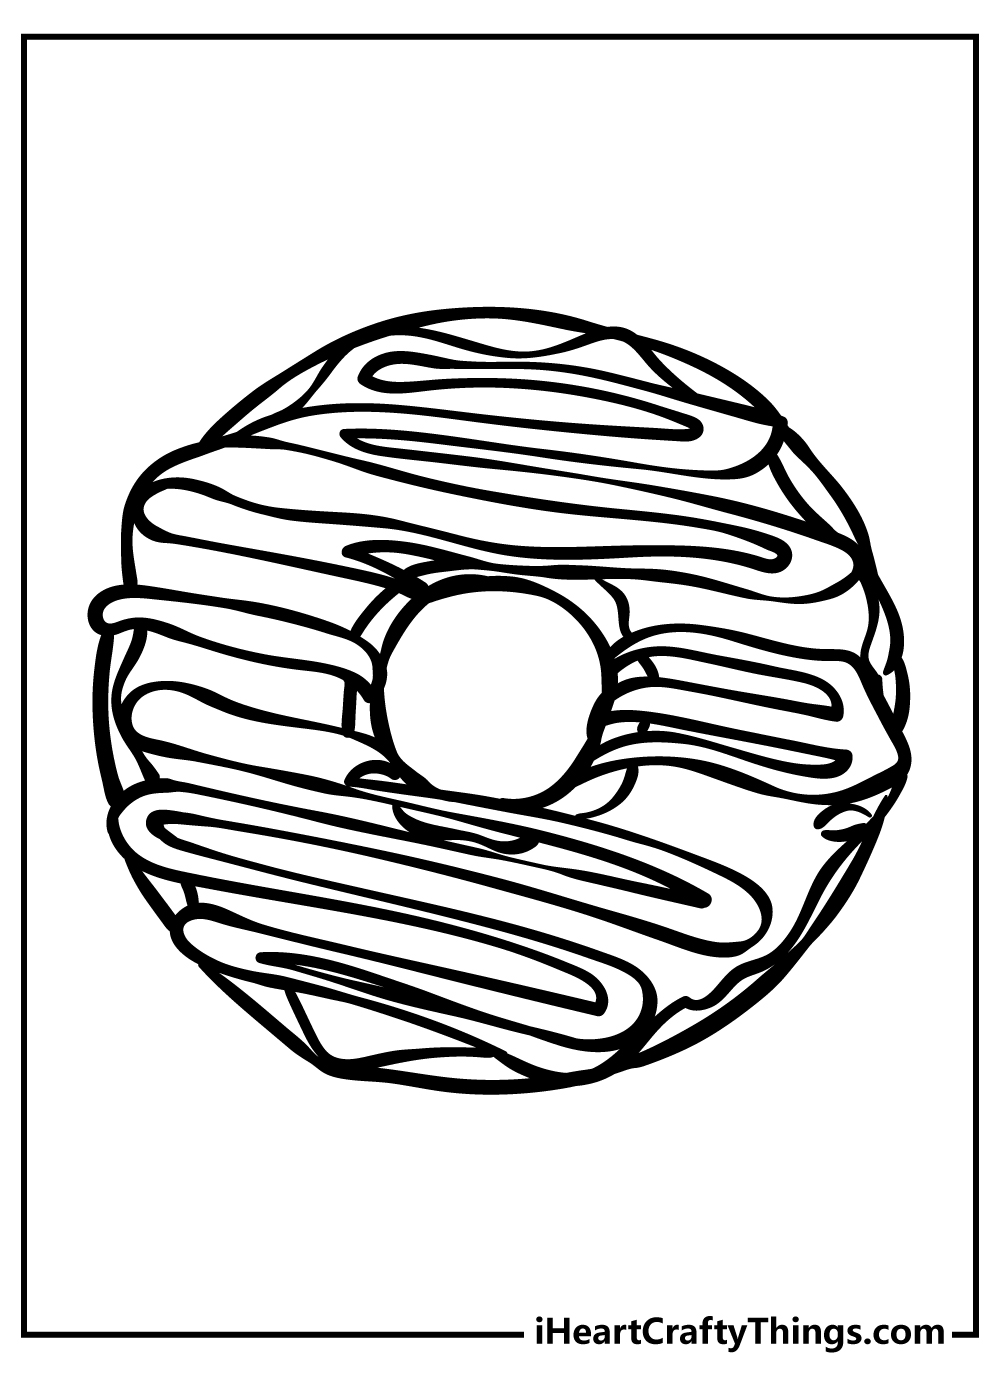 Printable Donut Coloring Pages Updated 20